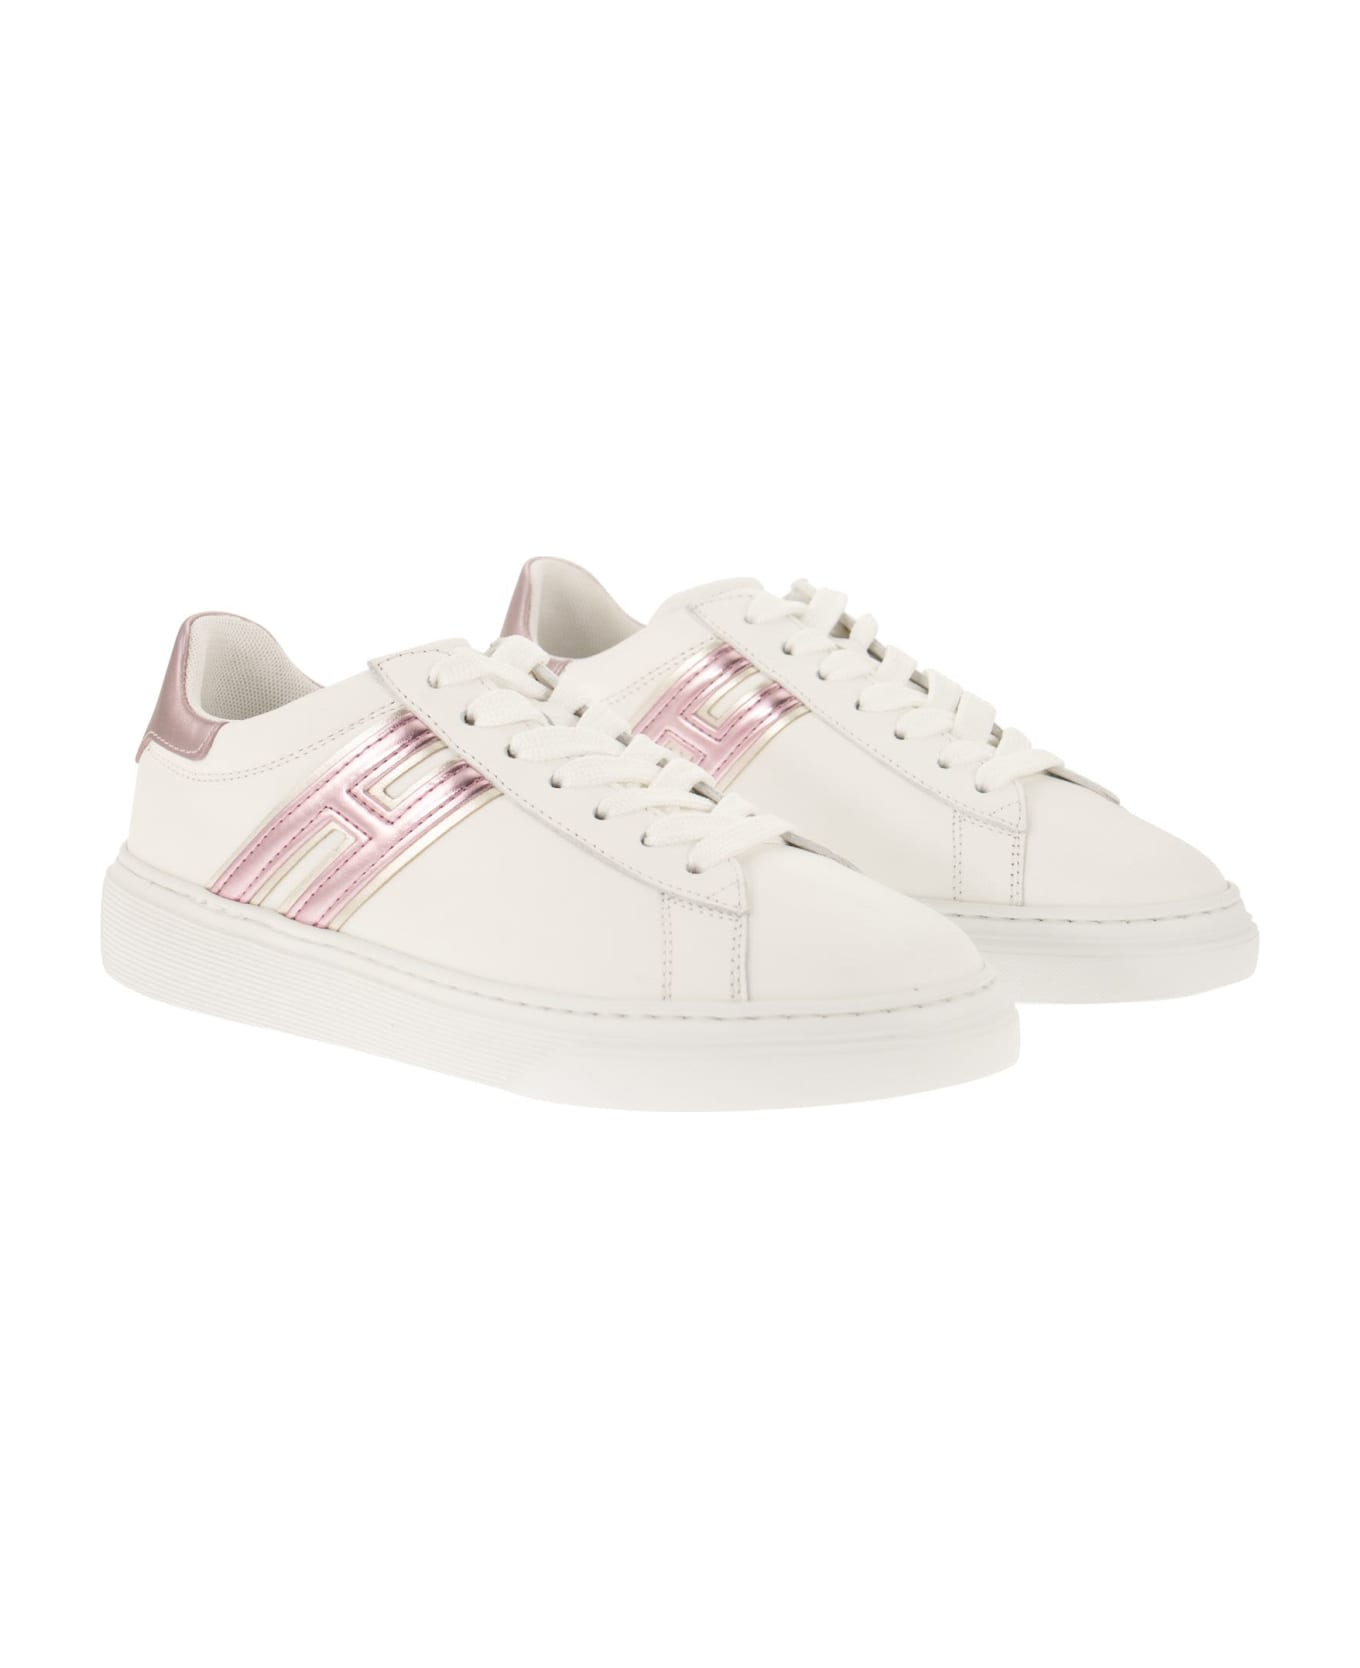 Hogan Sneakers "h365" In Leather - White/pink